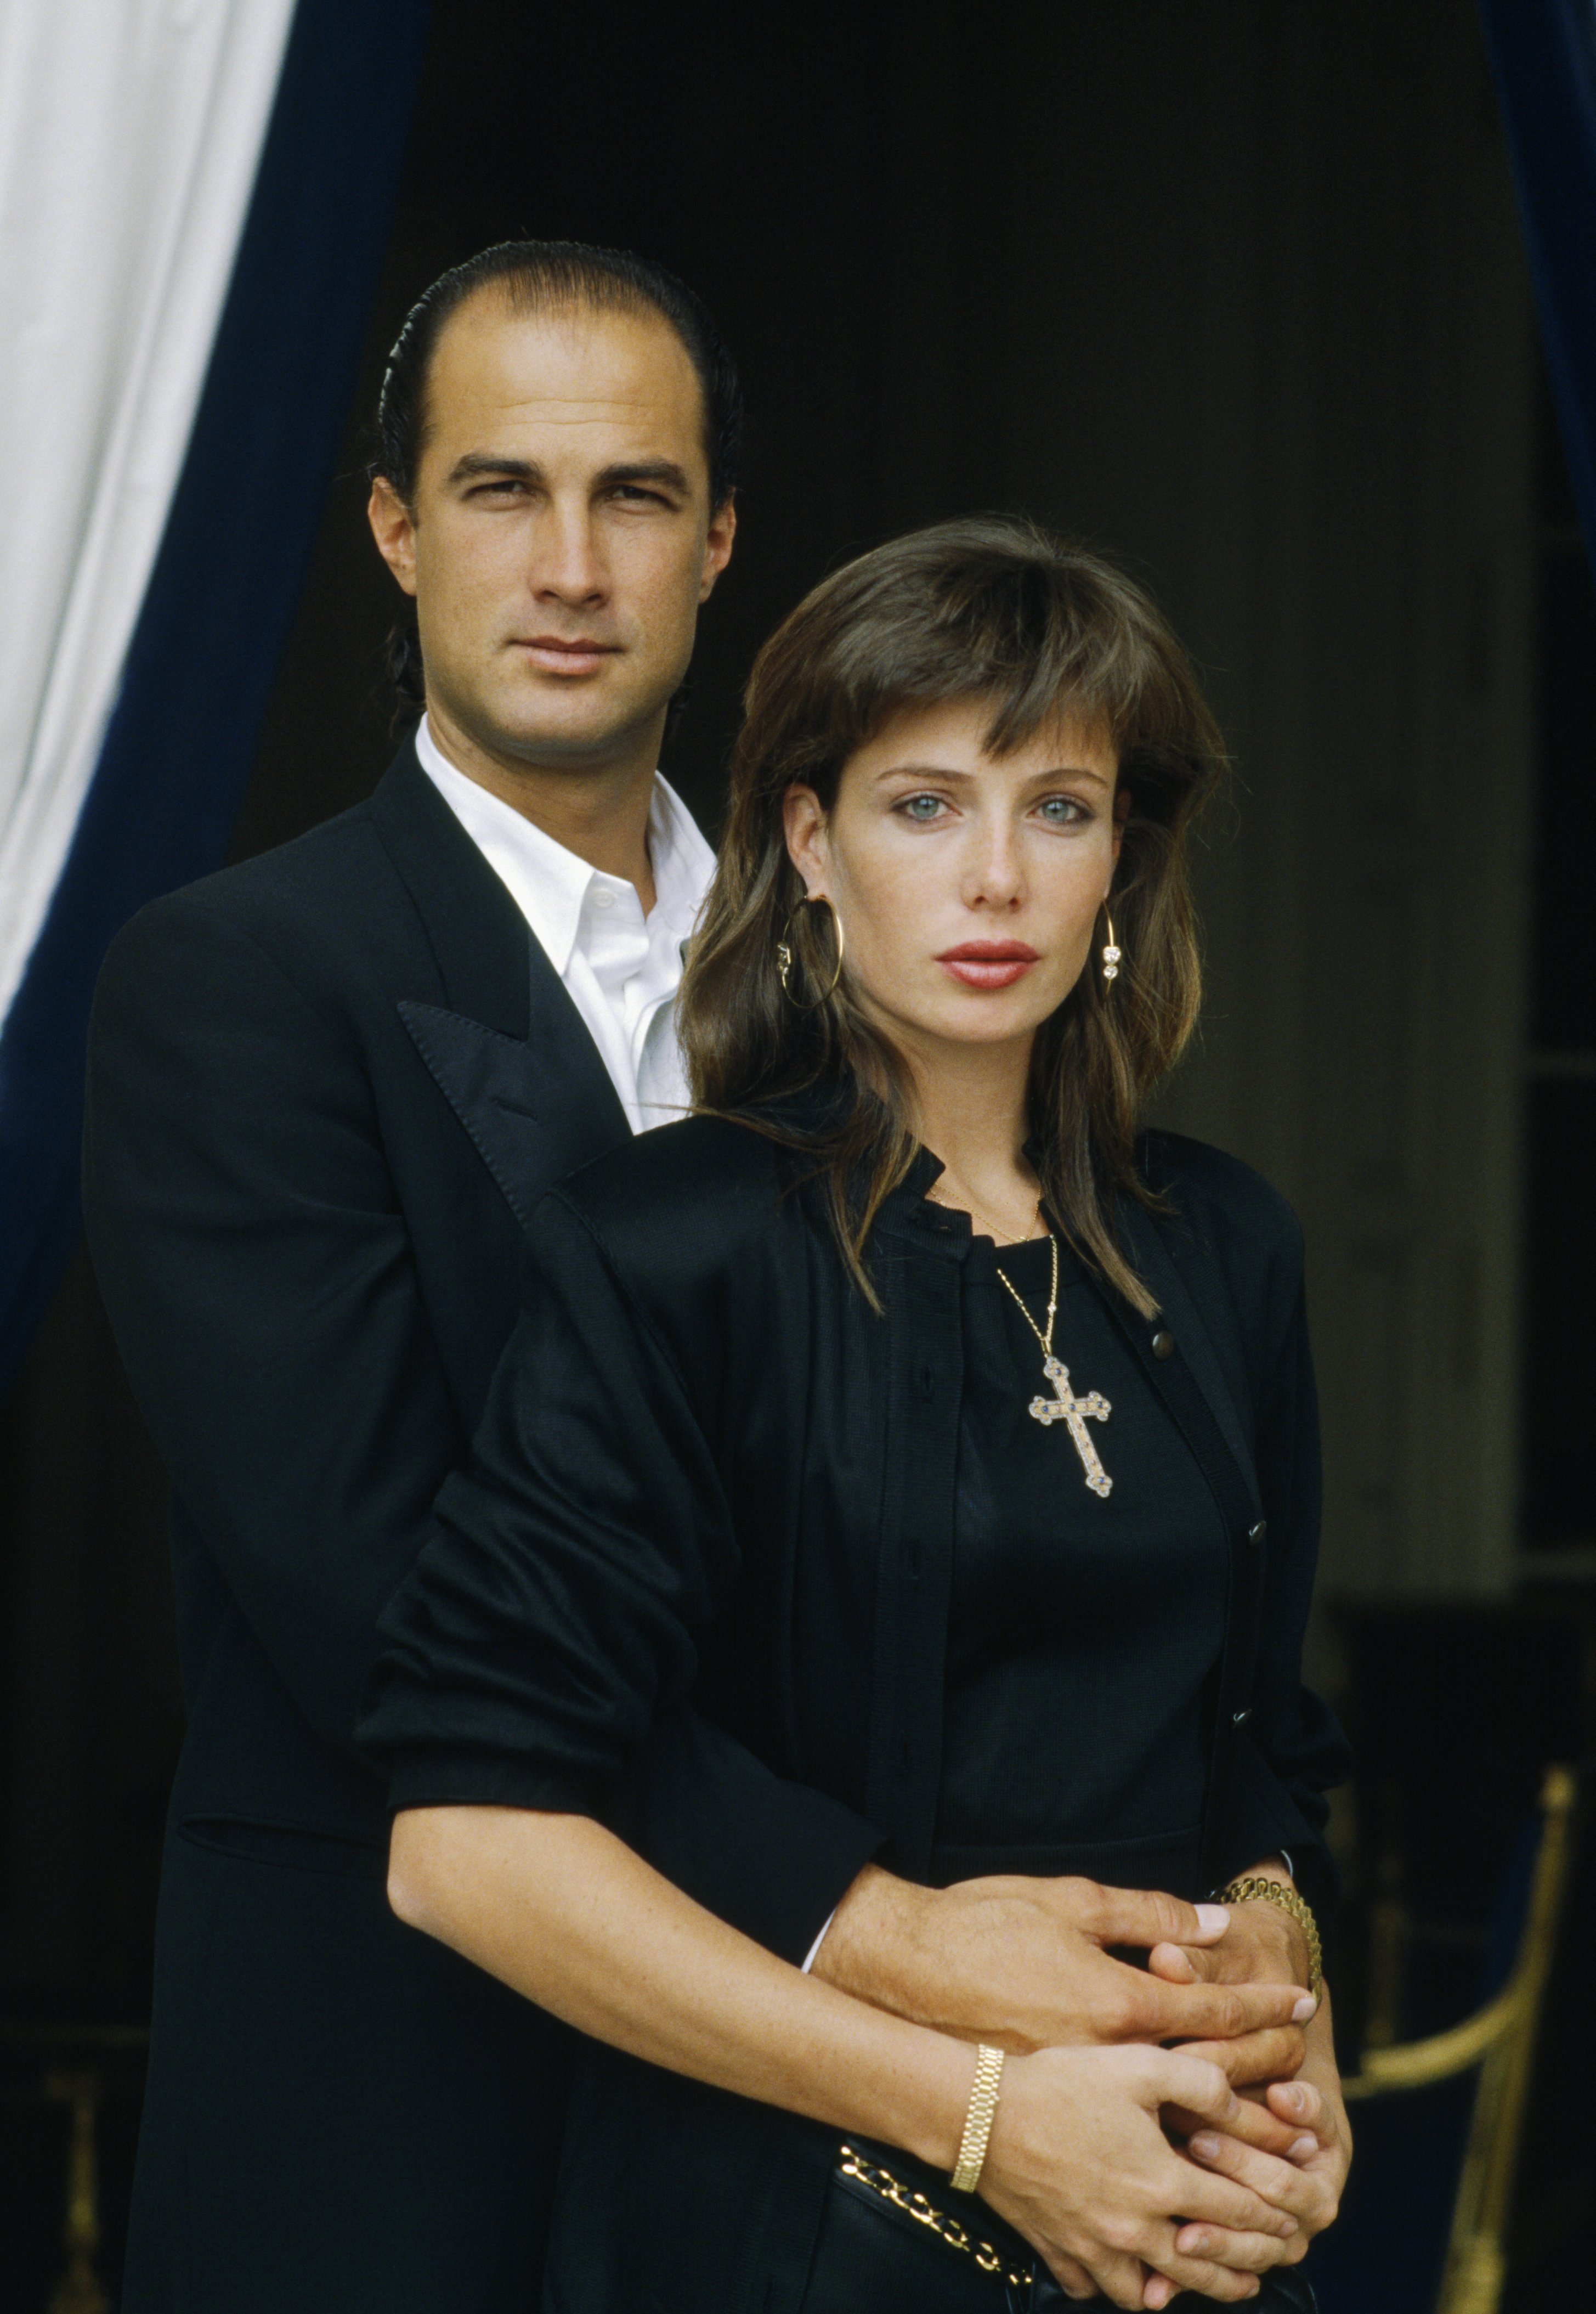 Steven Seagal and his wife Kelly Le Brock photographed in 1988. / Source: Getty Images